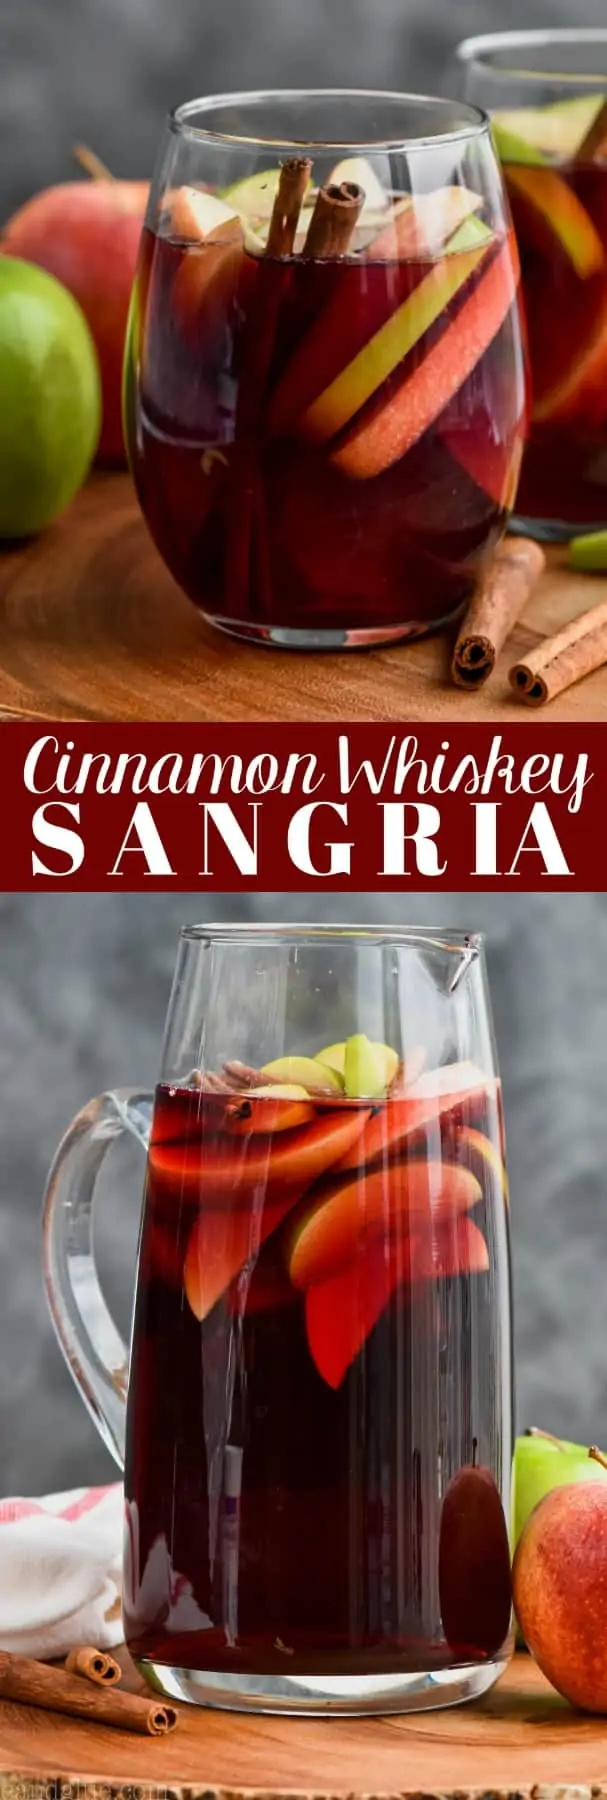 glass of cinnamon whiskey sangria filled with apple slices and cinnamon sticks